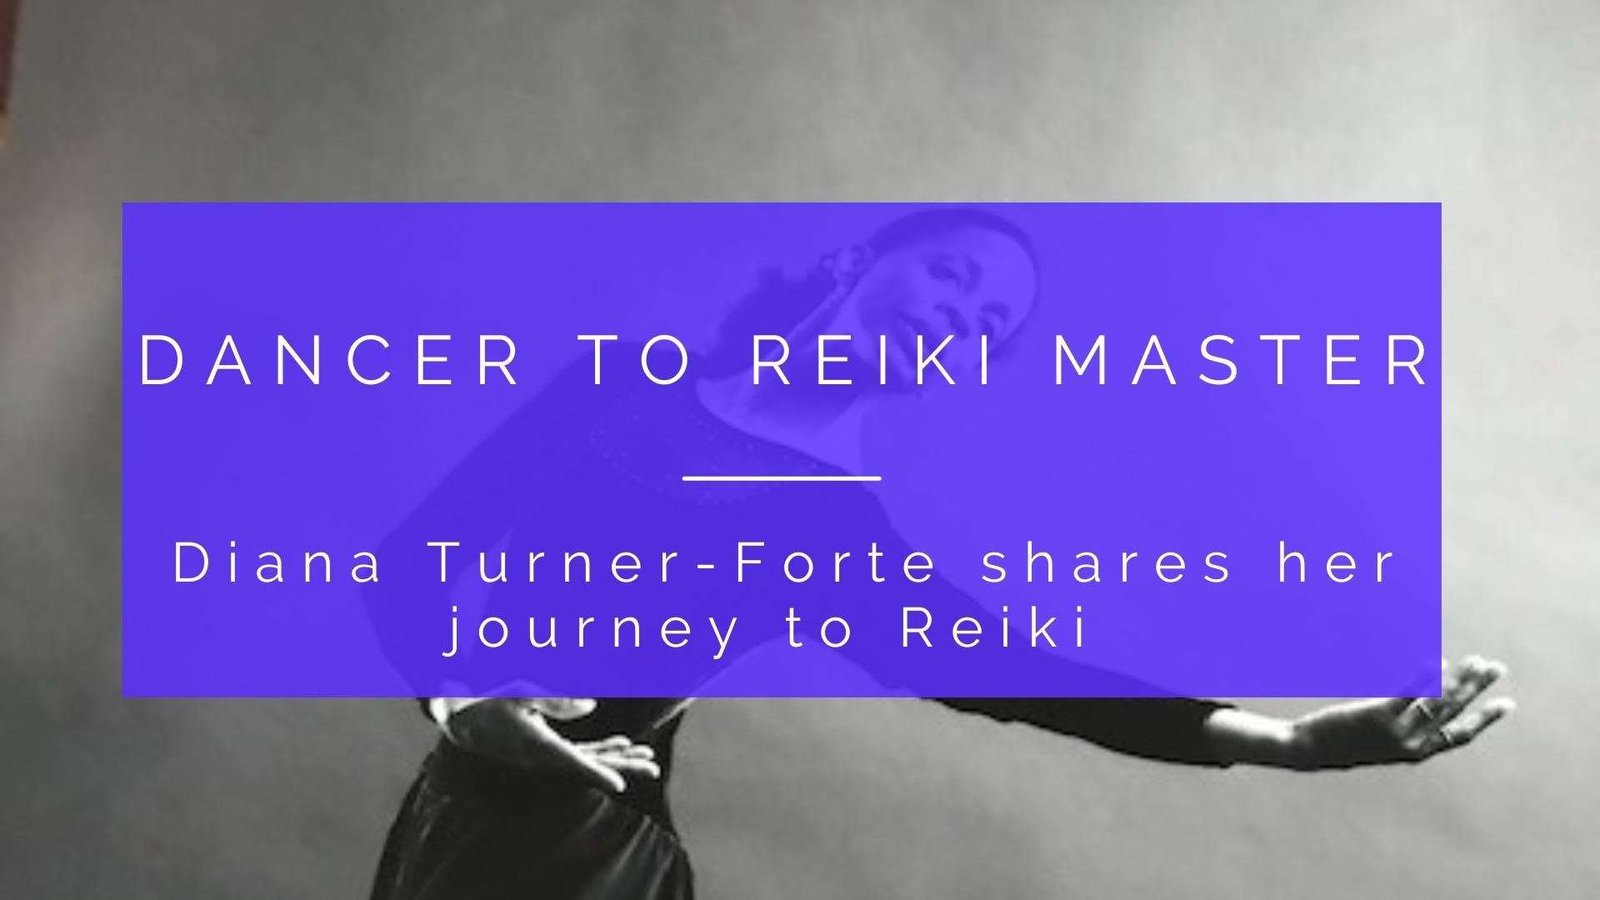 My Story: From Dancer to Reiki Master